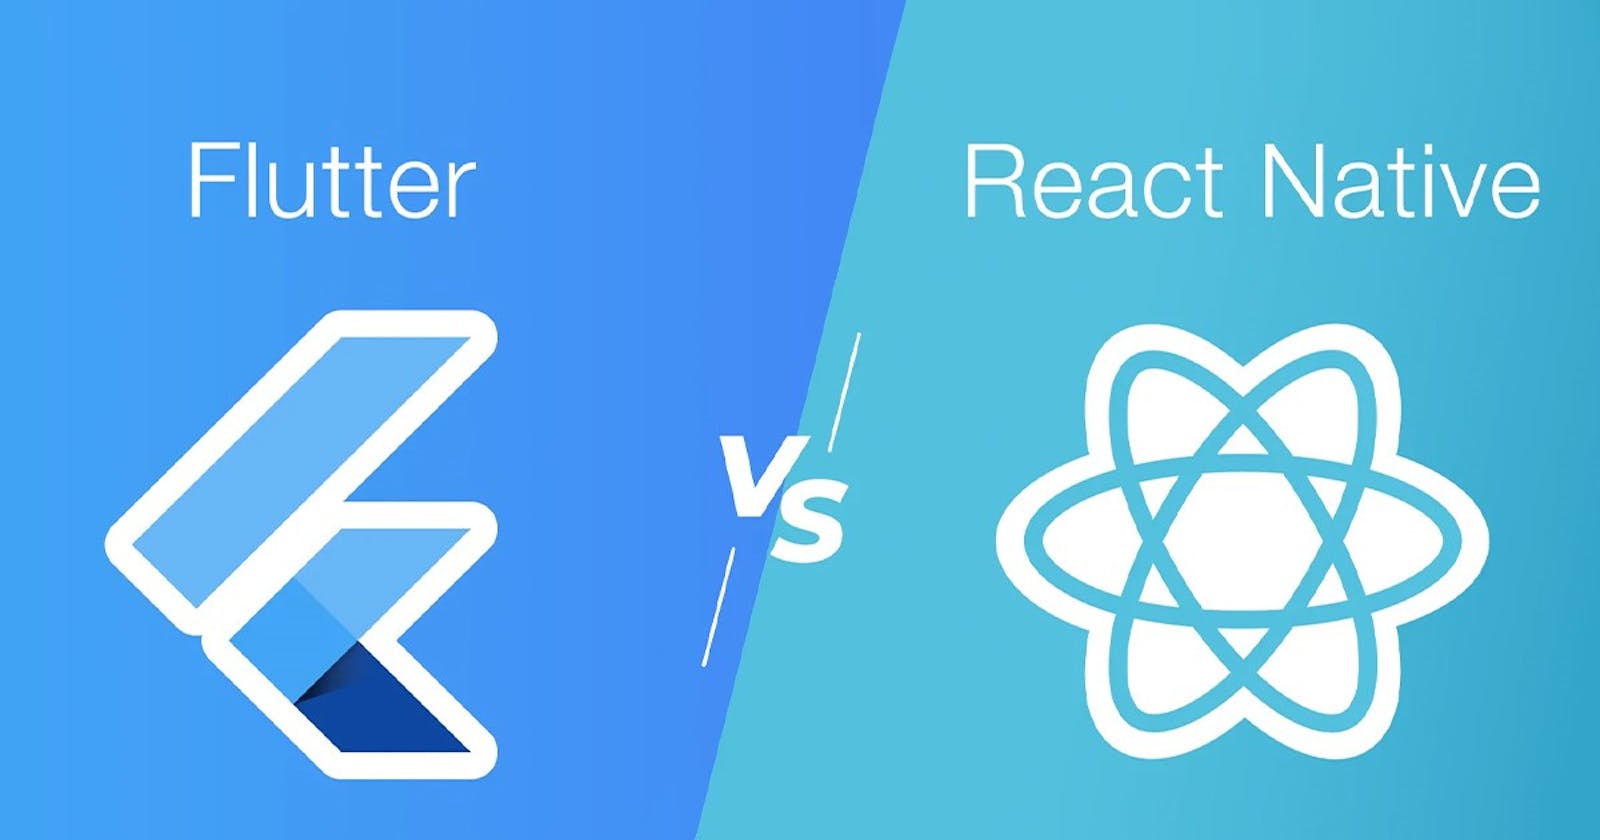 Should I go with Flutter or React Native?